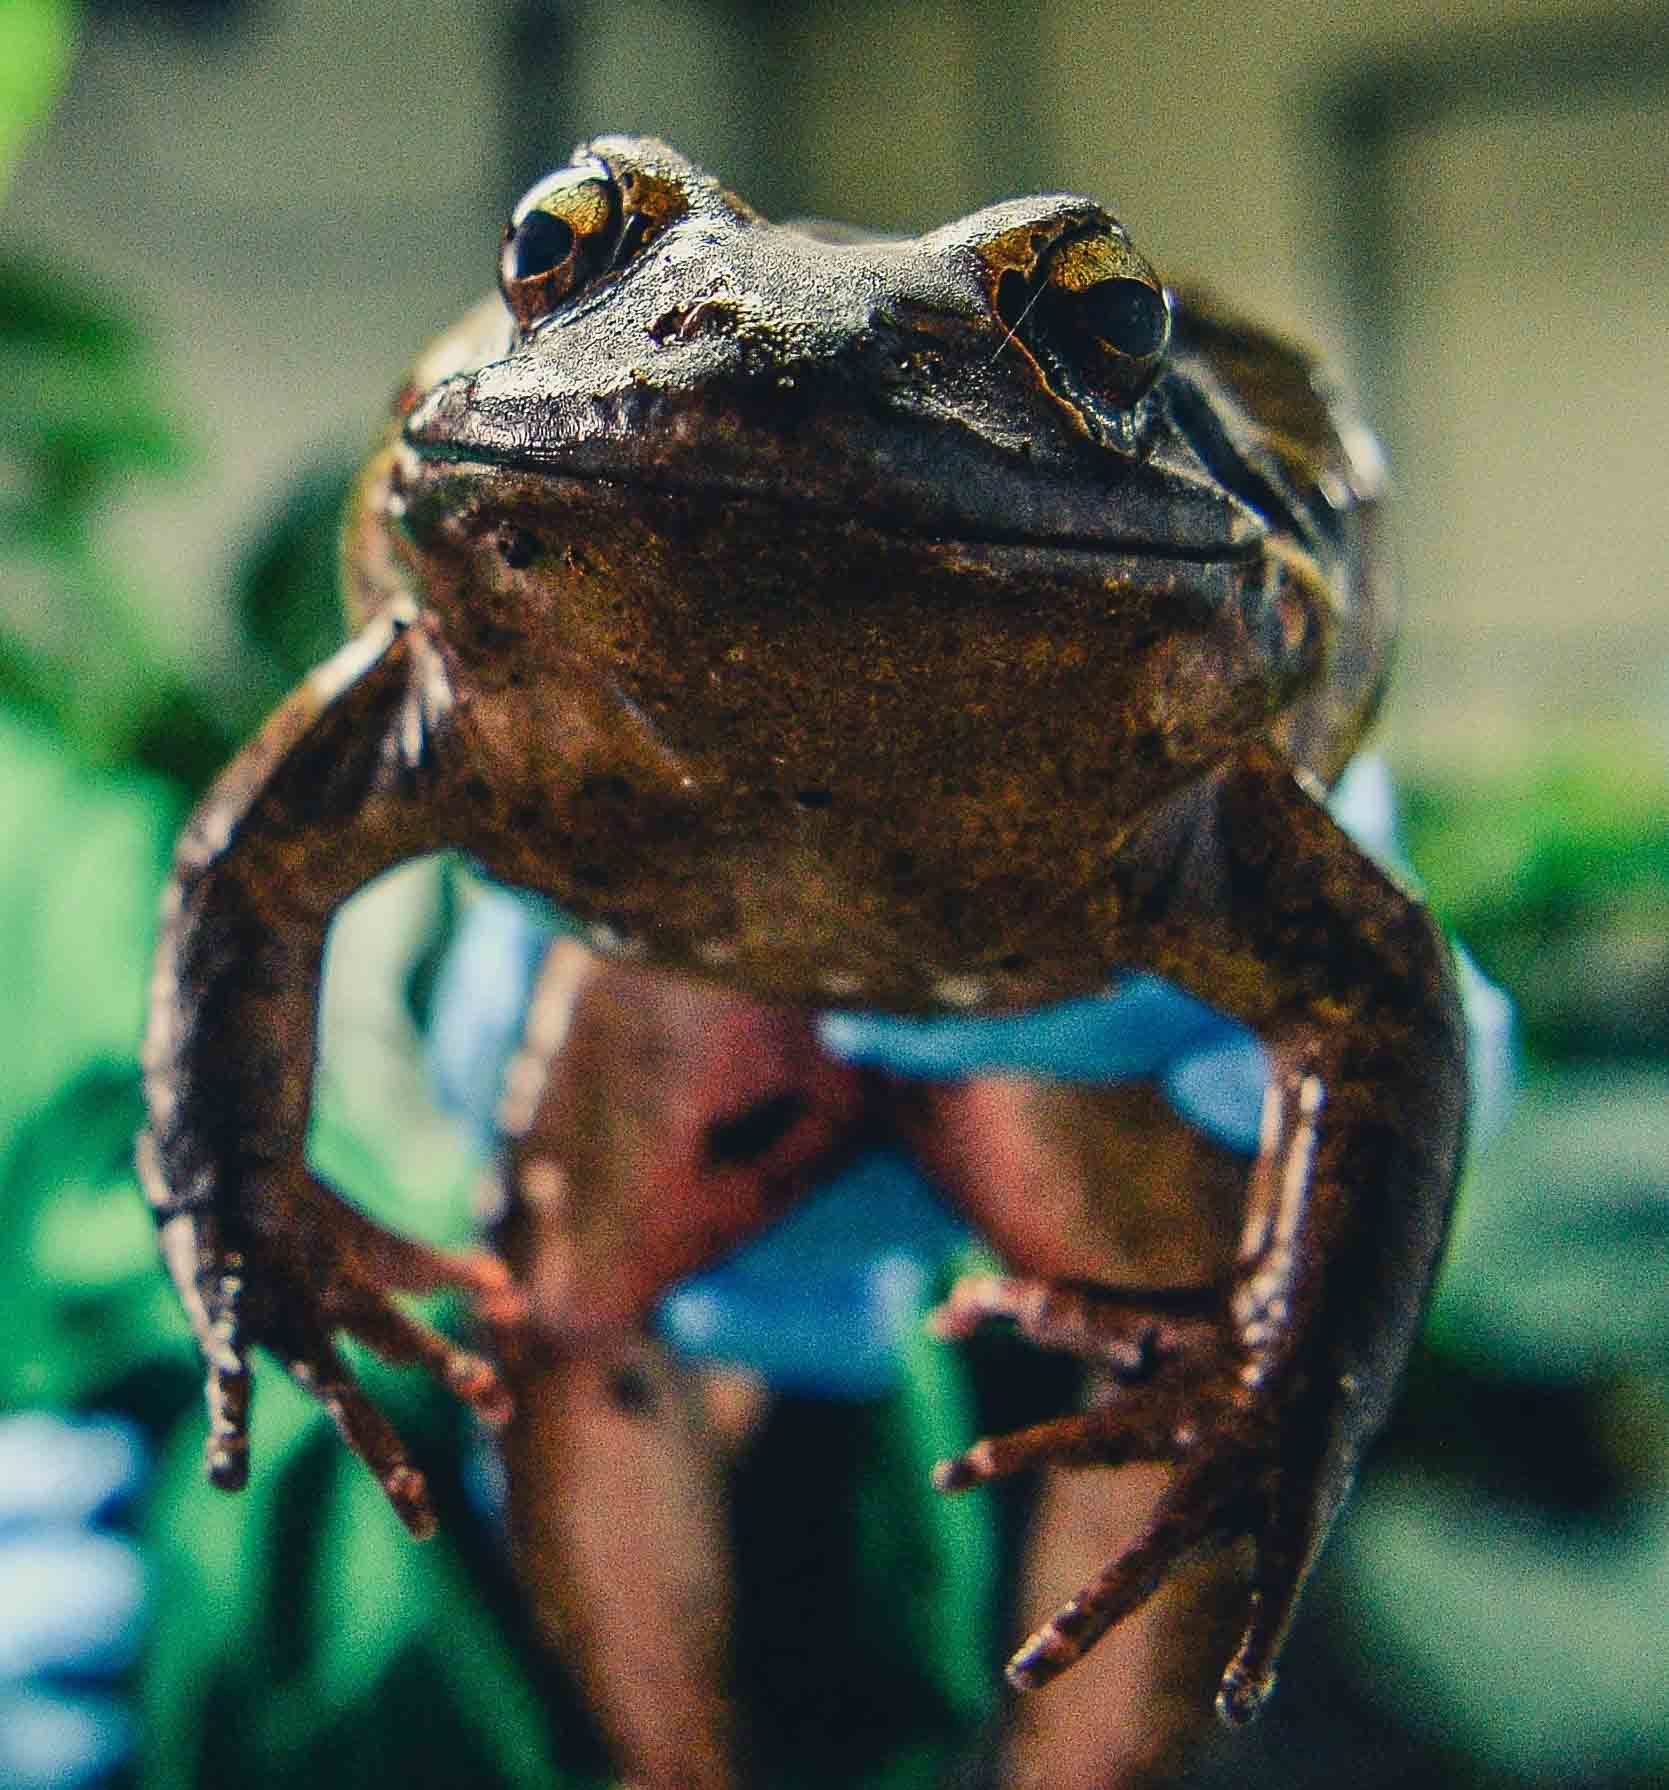 Conservationists sound alarm as one of worlds largest frogs becomes virtually extinct.